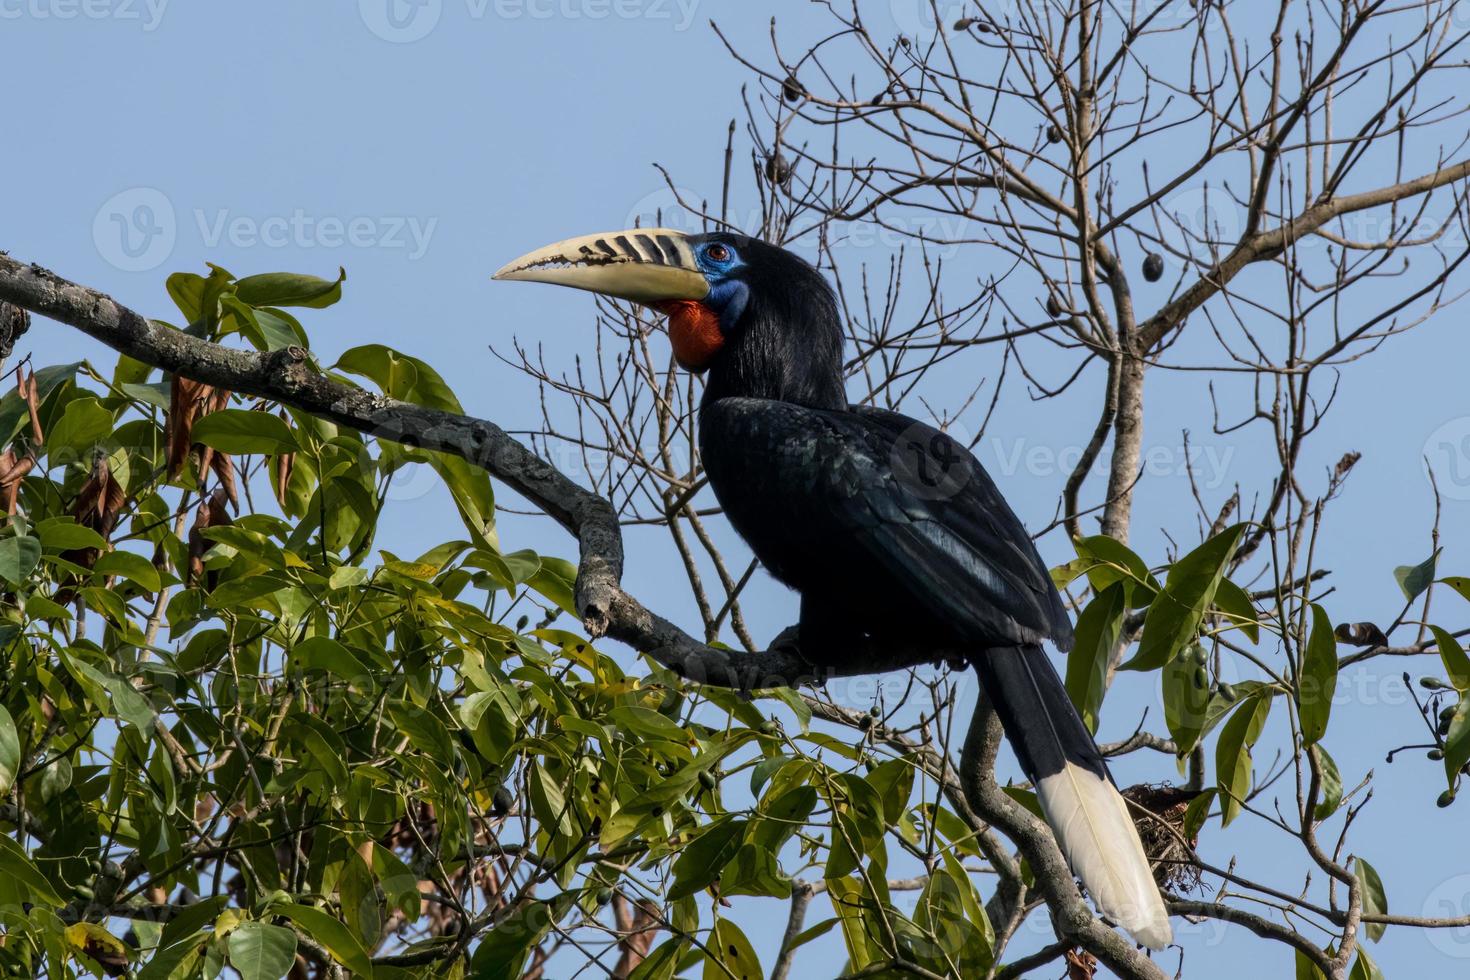 A female rufous-necked hornbill or Aceros nipalensis observed in Latpanchar in West Bengal, India photo